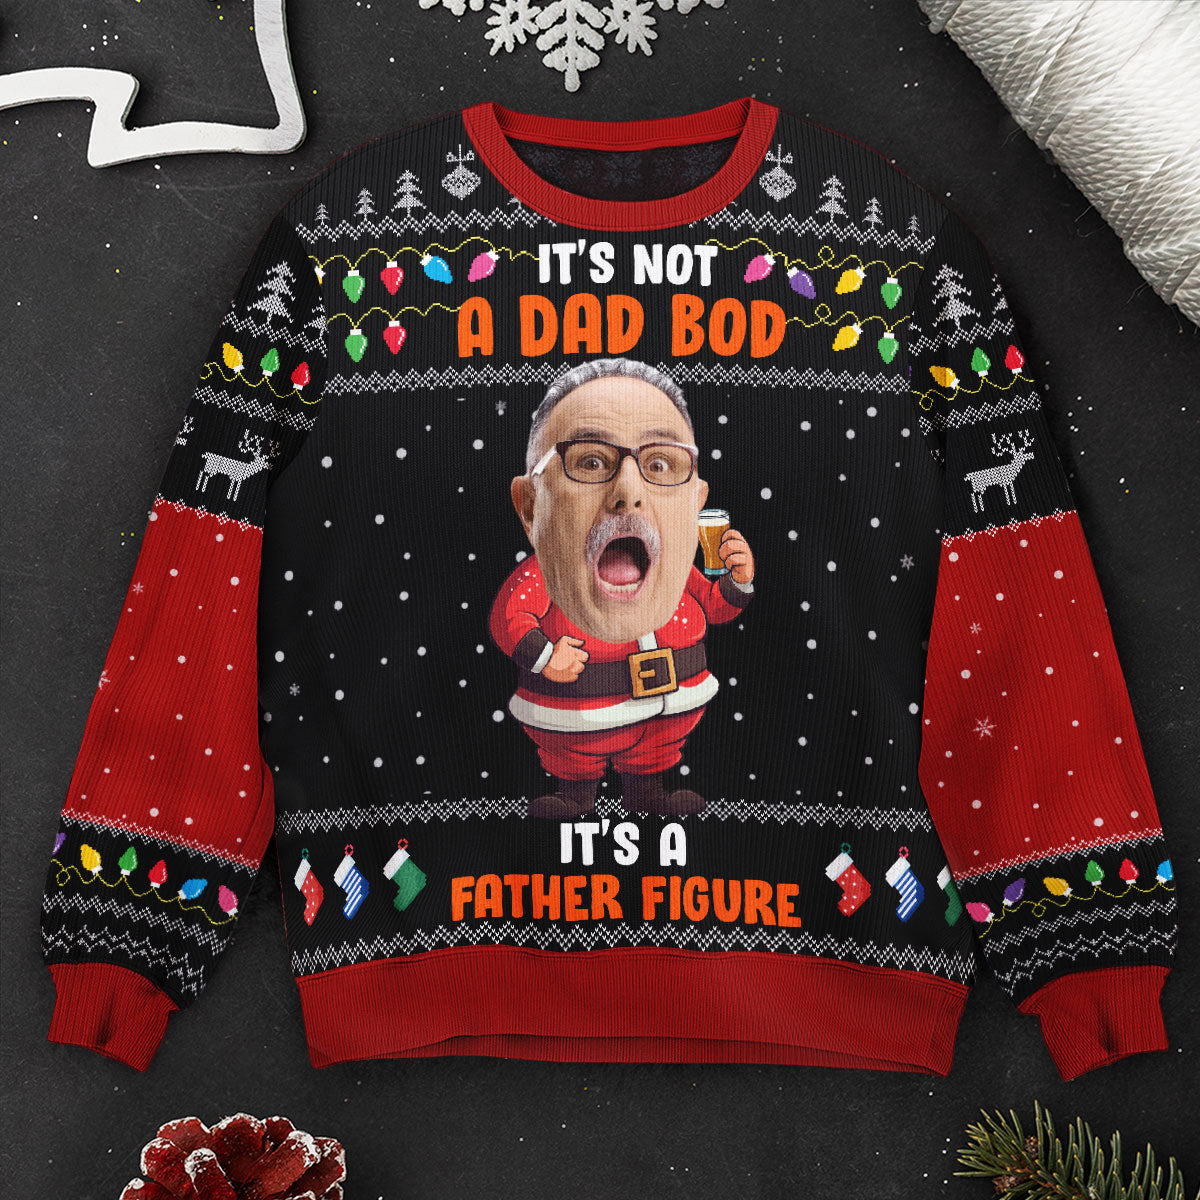 It's Not A Dad Bob It's A Father Figure Santa Face - Personalized Photo Ugly Sweater